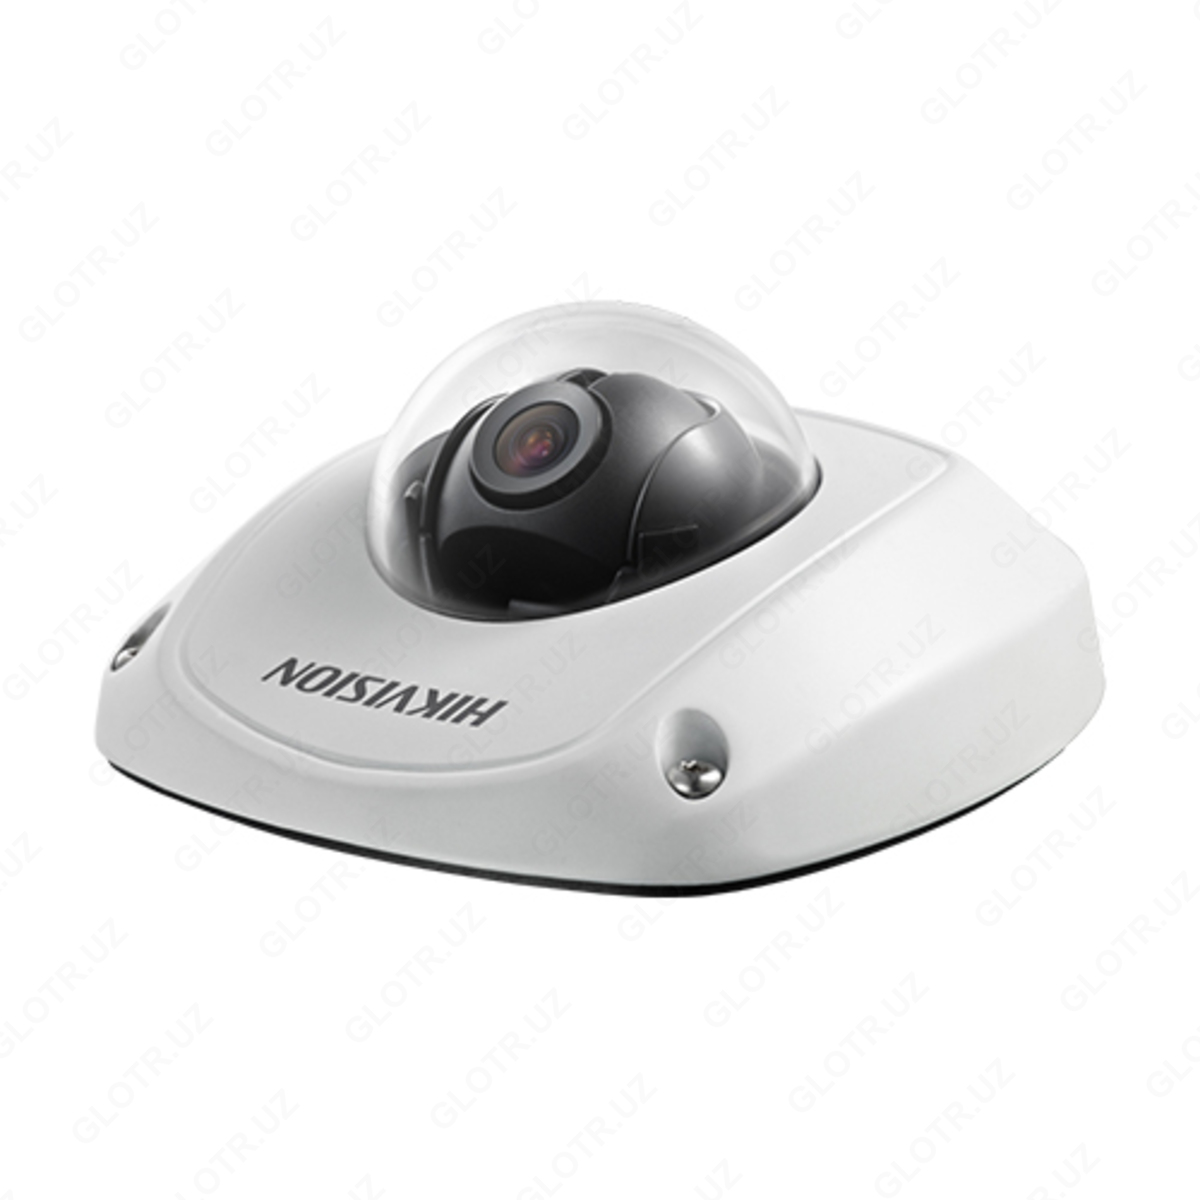 Камера DS-2CE56D8T-IRS 2.8mm 2mp Smart IR 20m Built-in microphone Mini Dome HD KAMERA HIKVISION_0